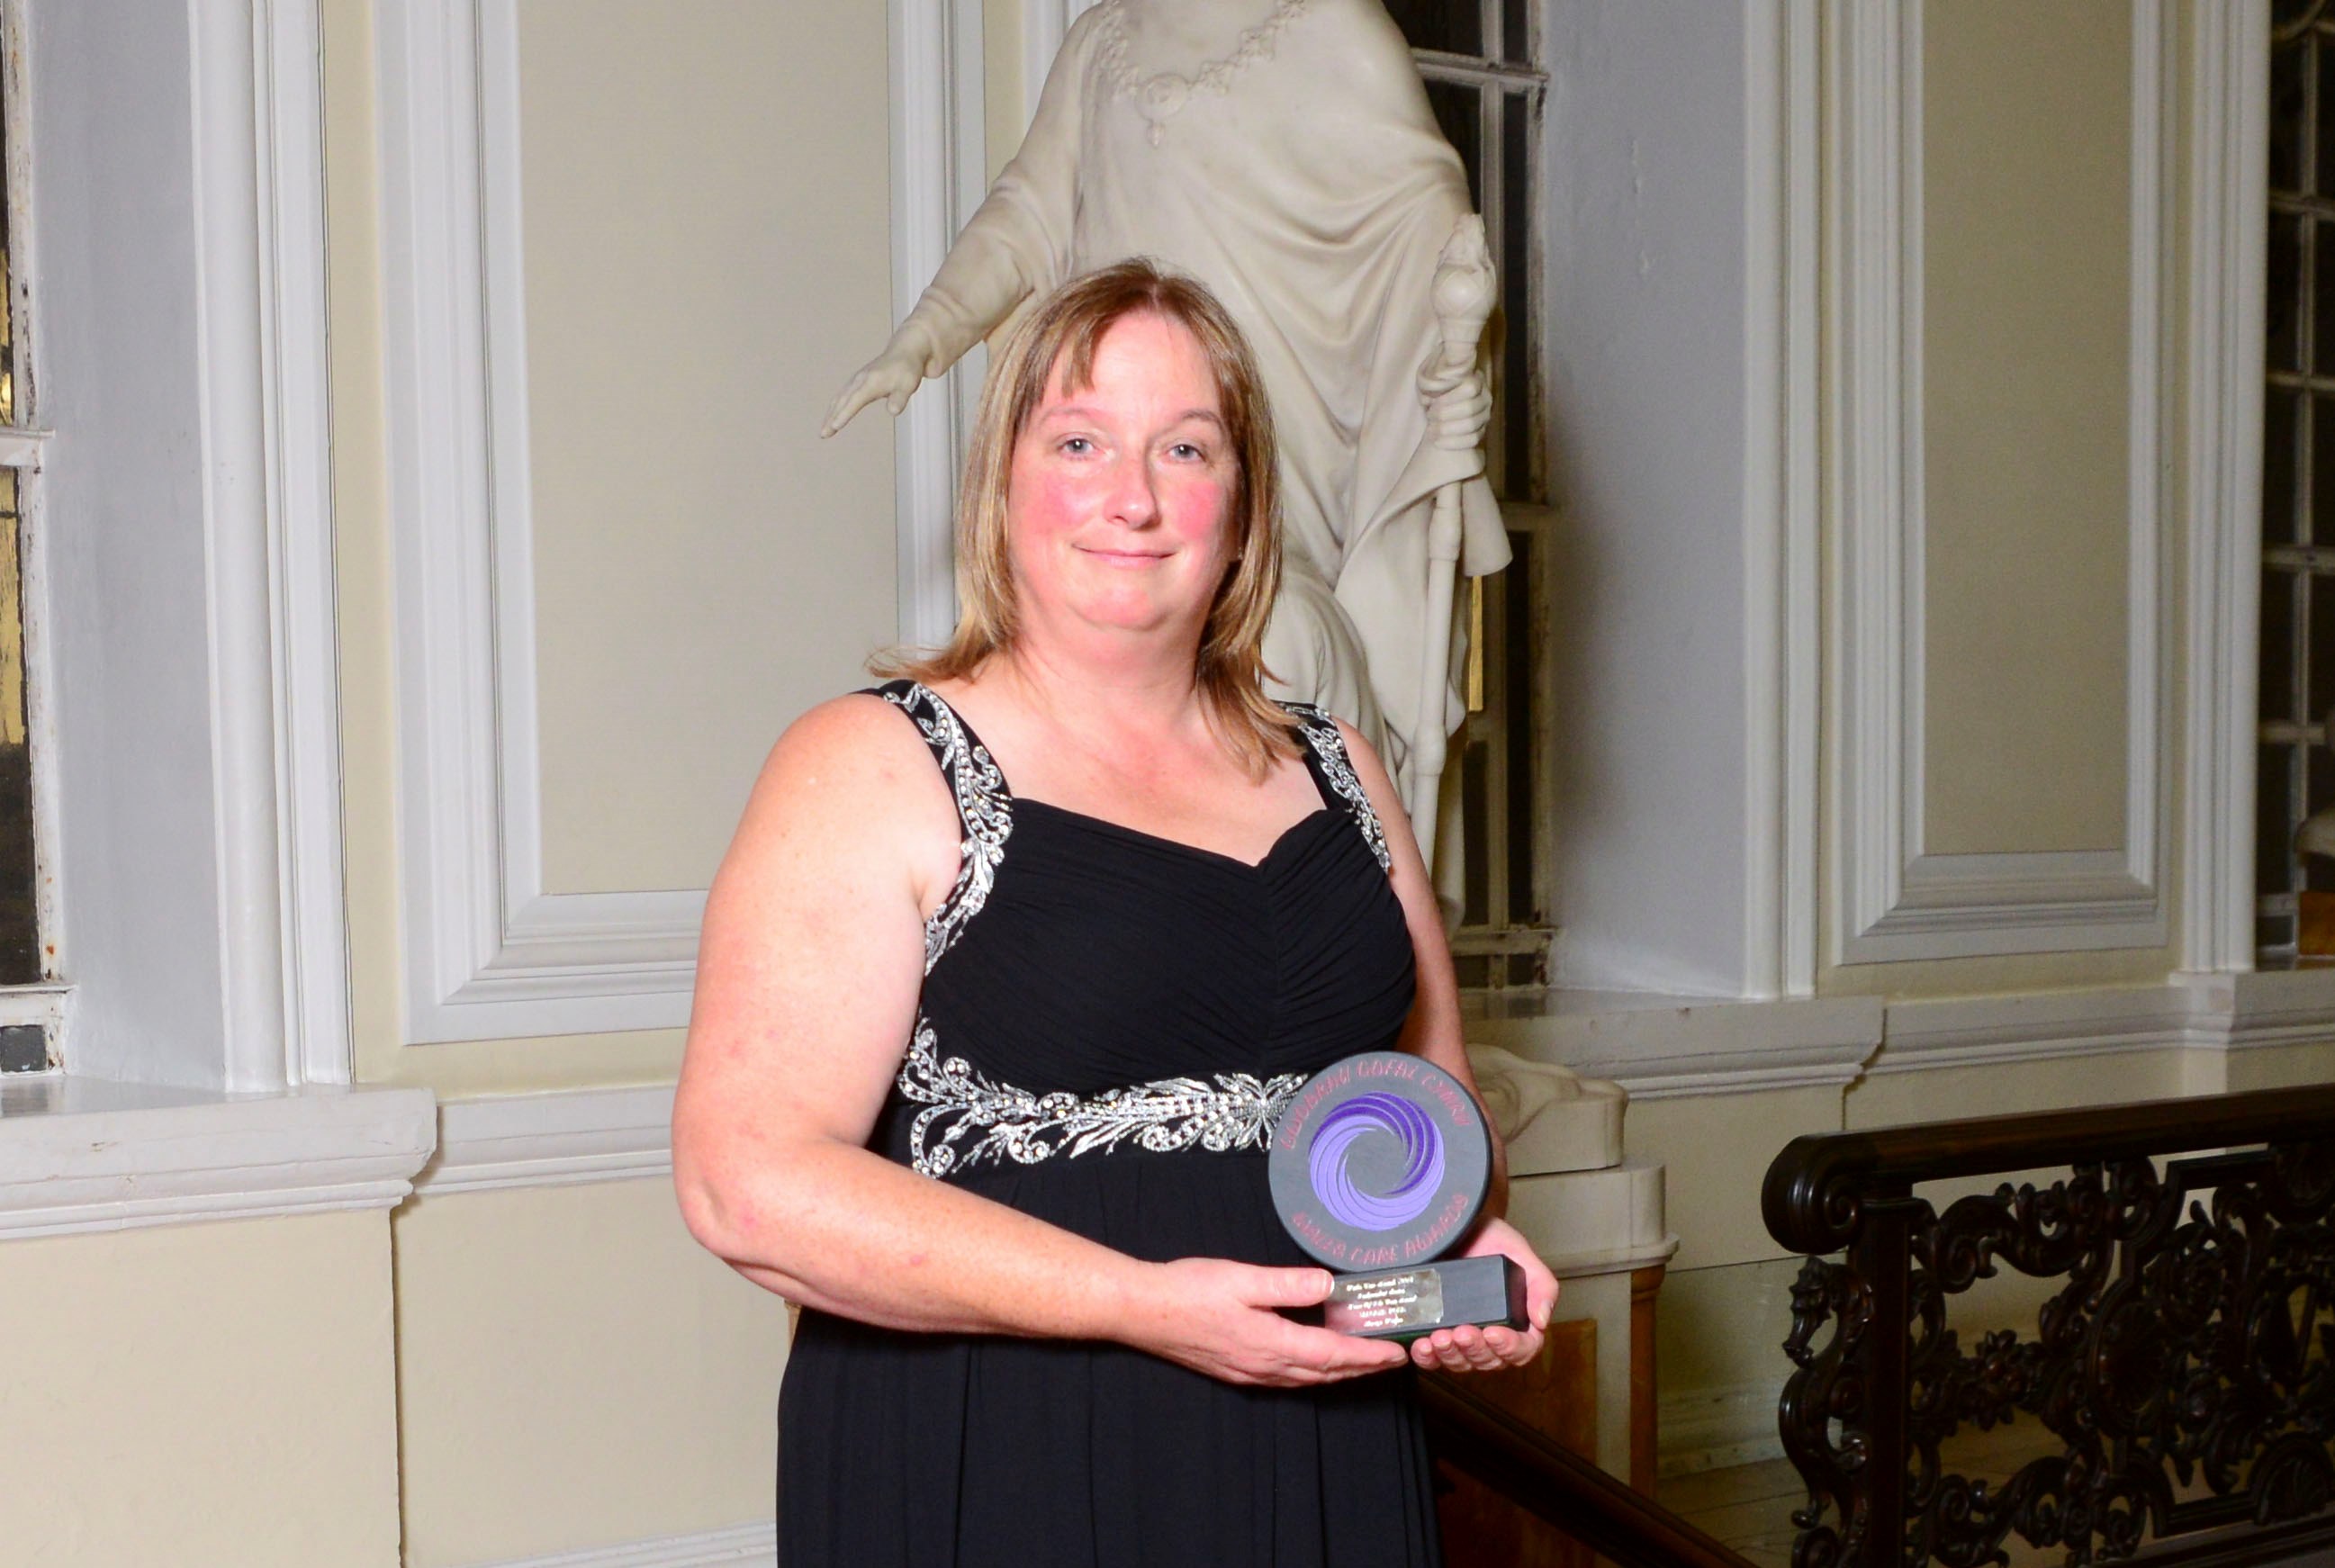 Swansea nurse Maggie hailed as role model at awards